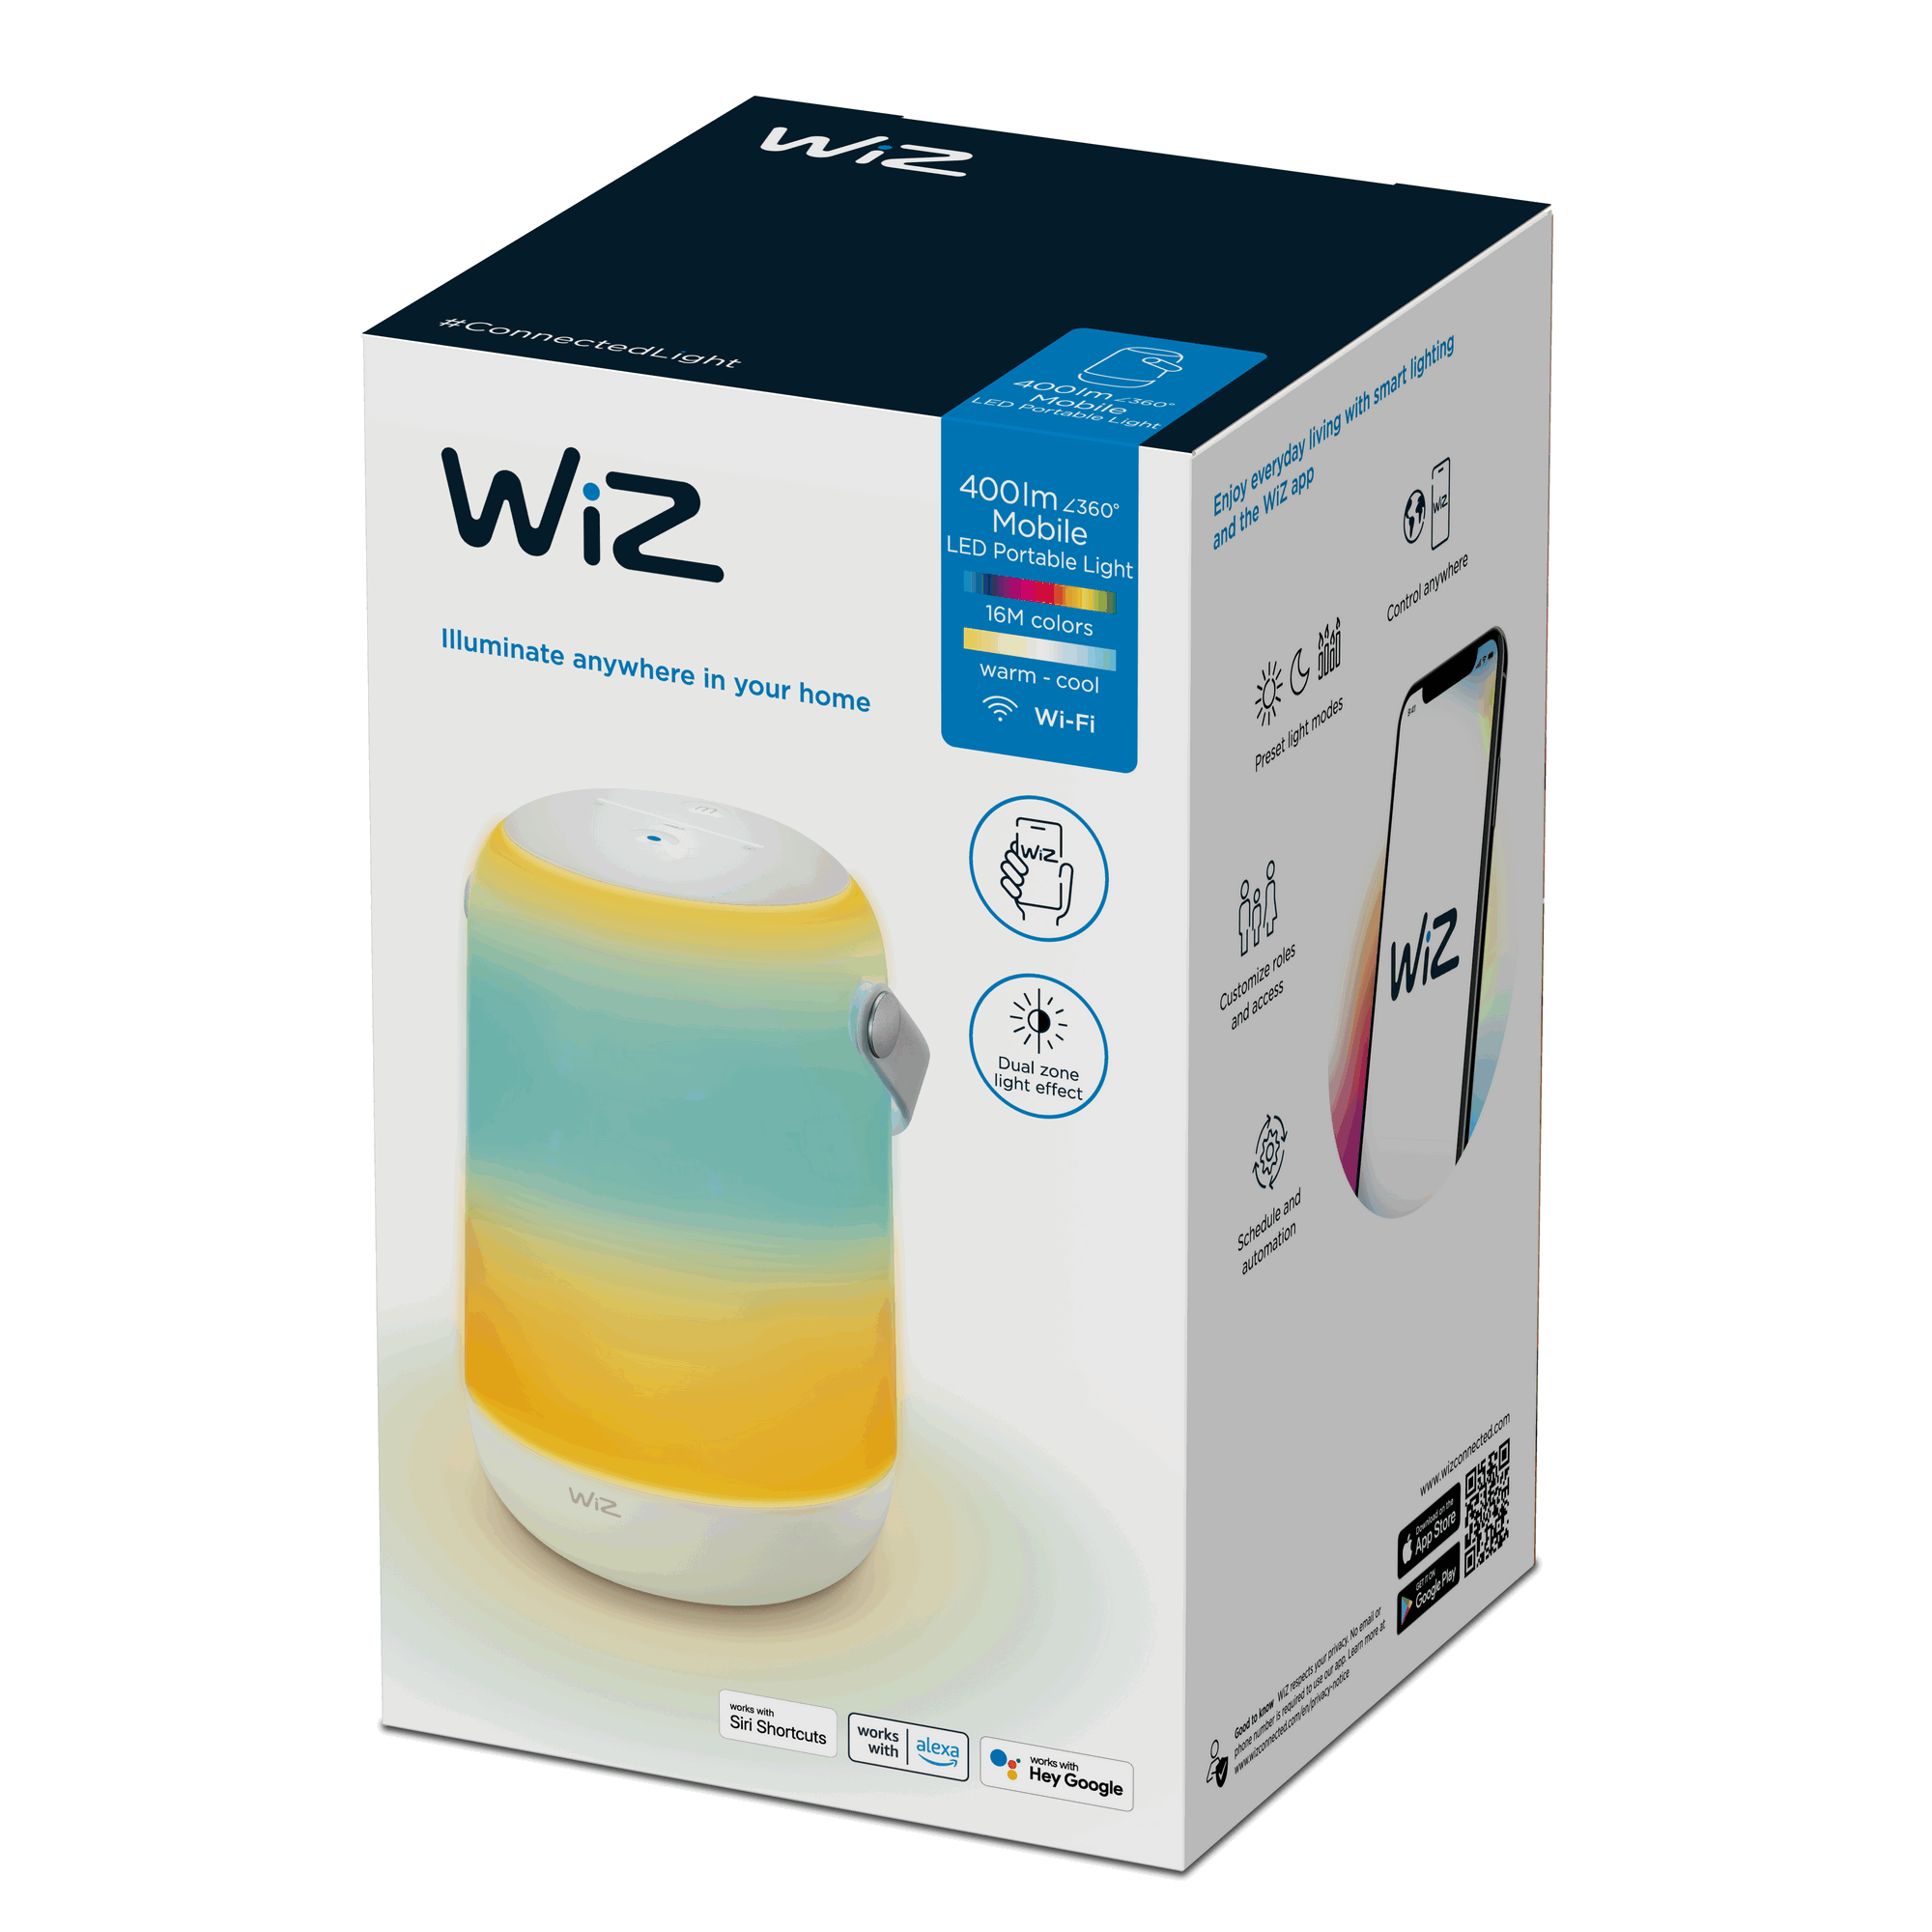 Tragbare Tischleuchte 'WiZ Mobile Portable RGB' 400 lm WiFi BT + product picture